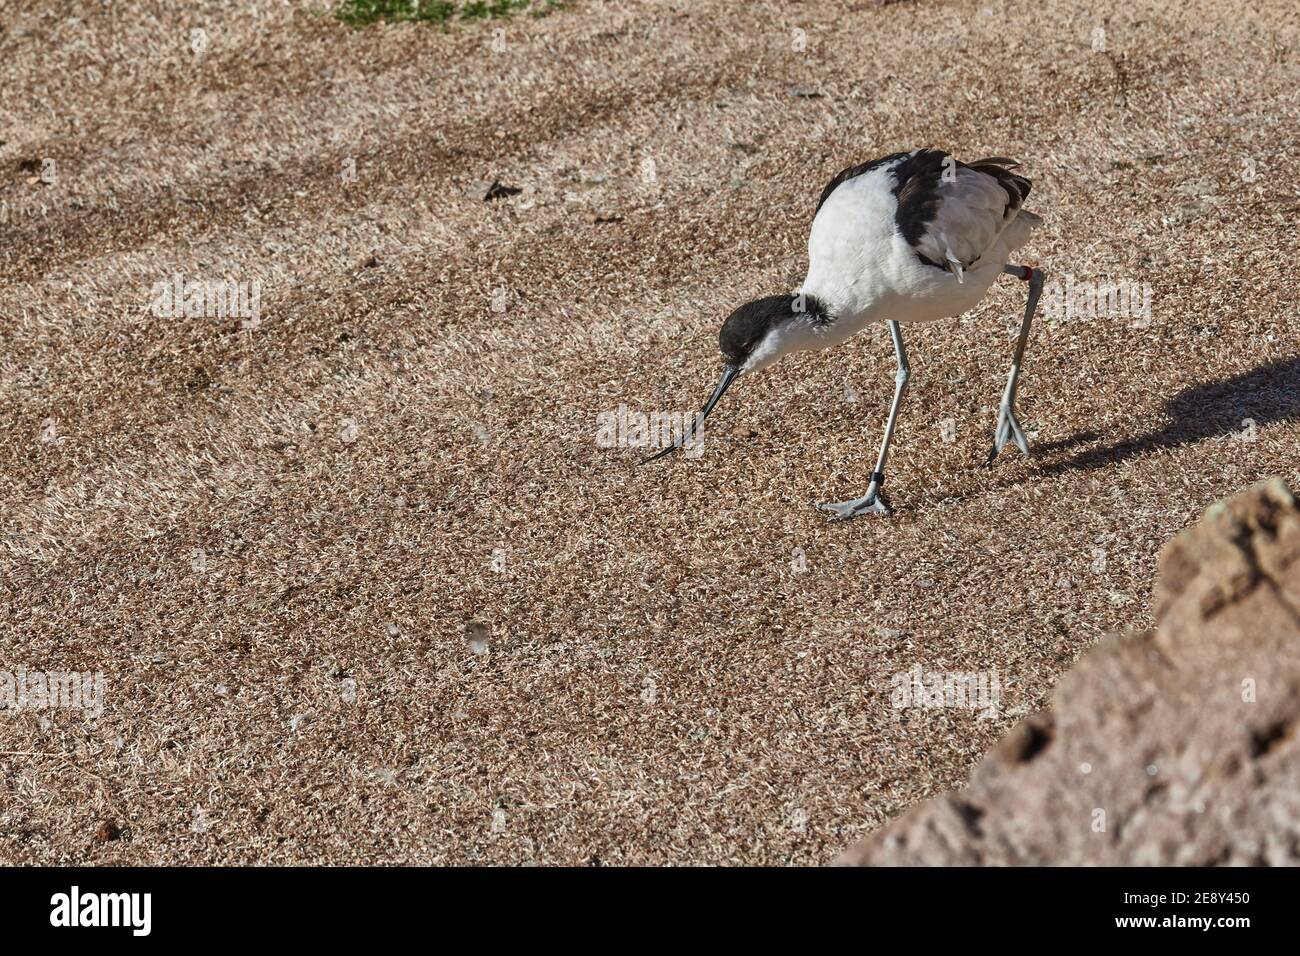 The common avocet, a wading bird with black and white plumage that is characterized by its beak curved upwards in the oceanographic of Valencia, Spain Stock Photo